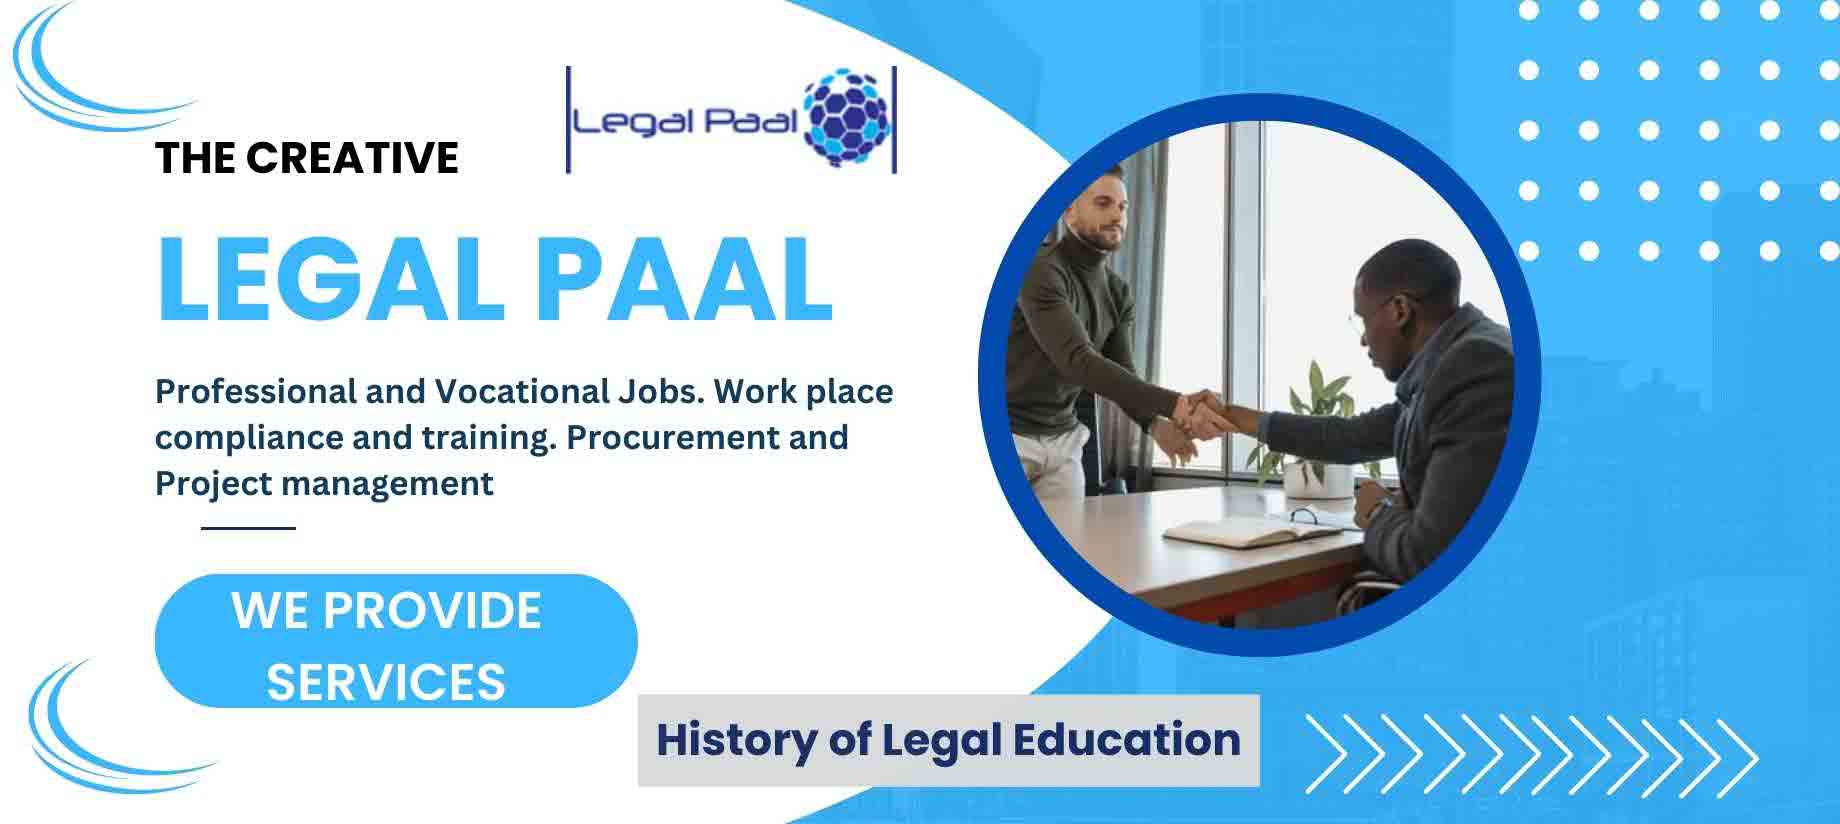 History of Legal Education